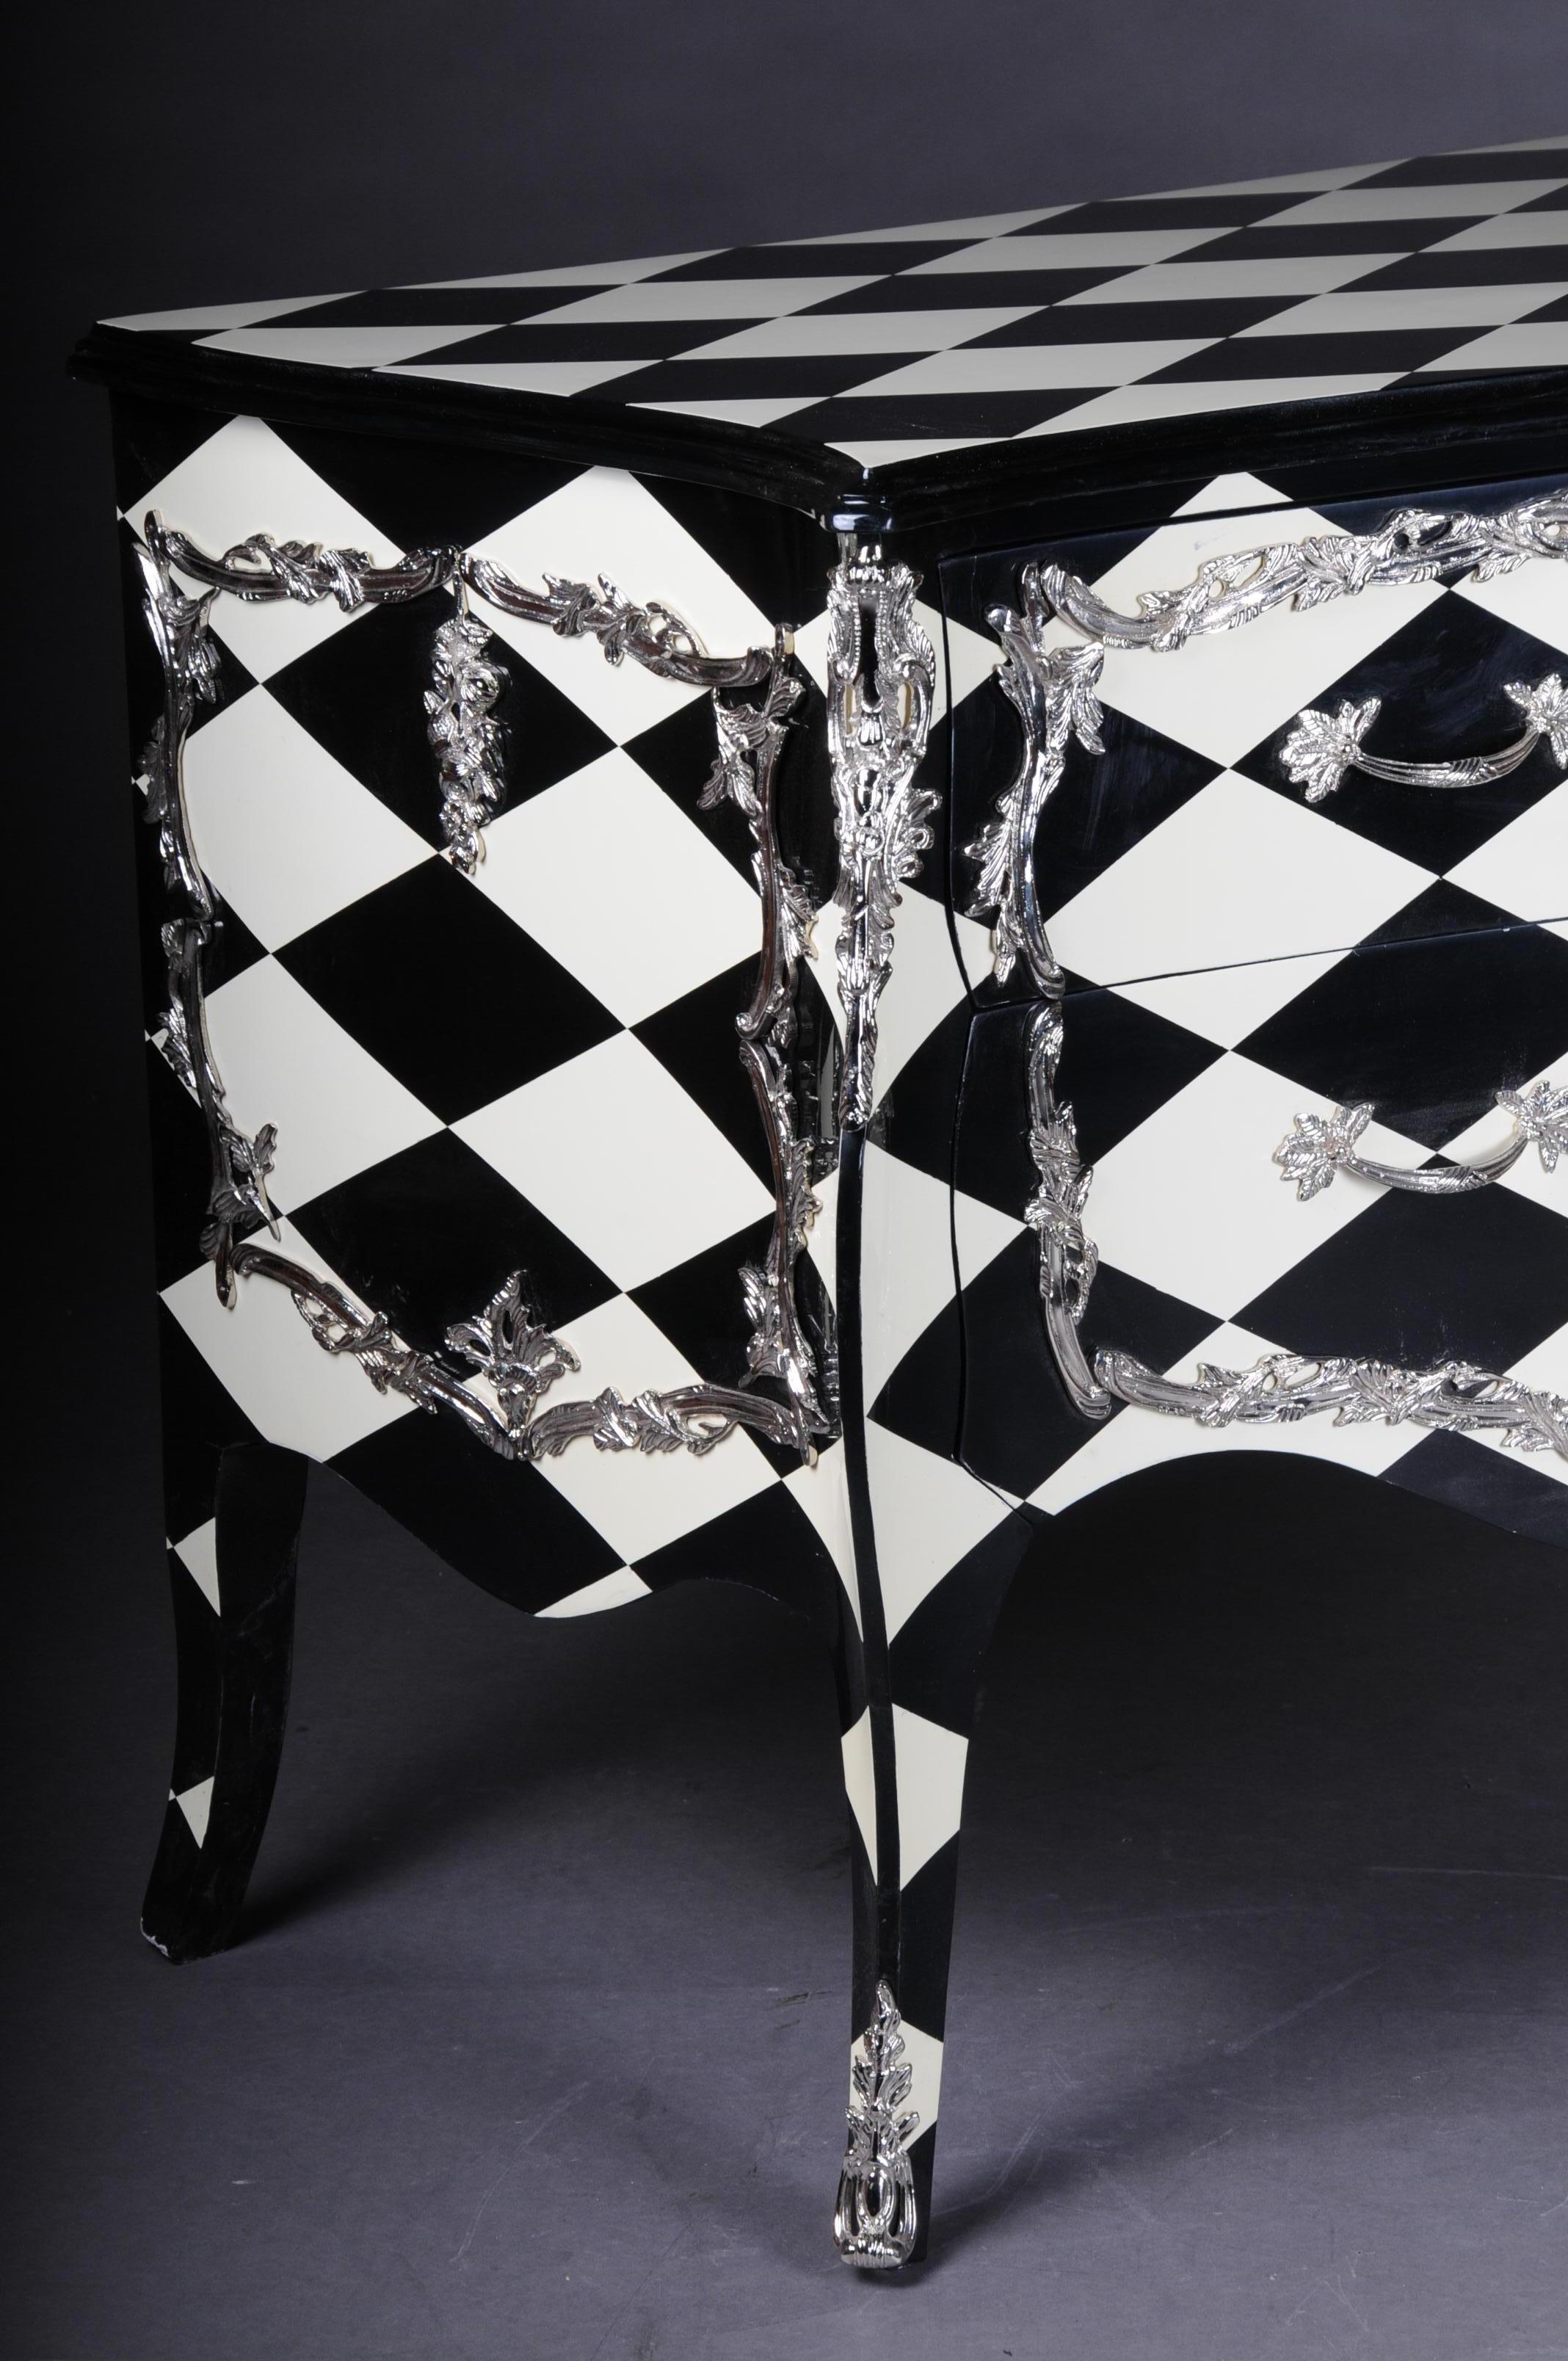 Designer Commode in Louis XV, Chessboard Pattern, Black and White For Sale 1